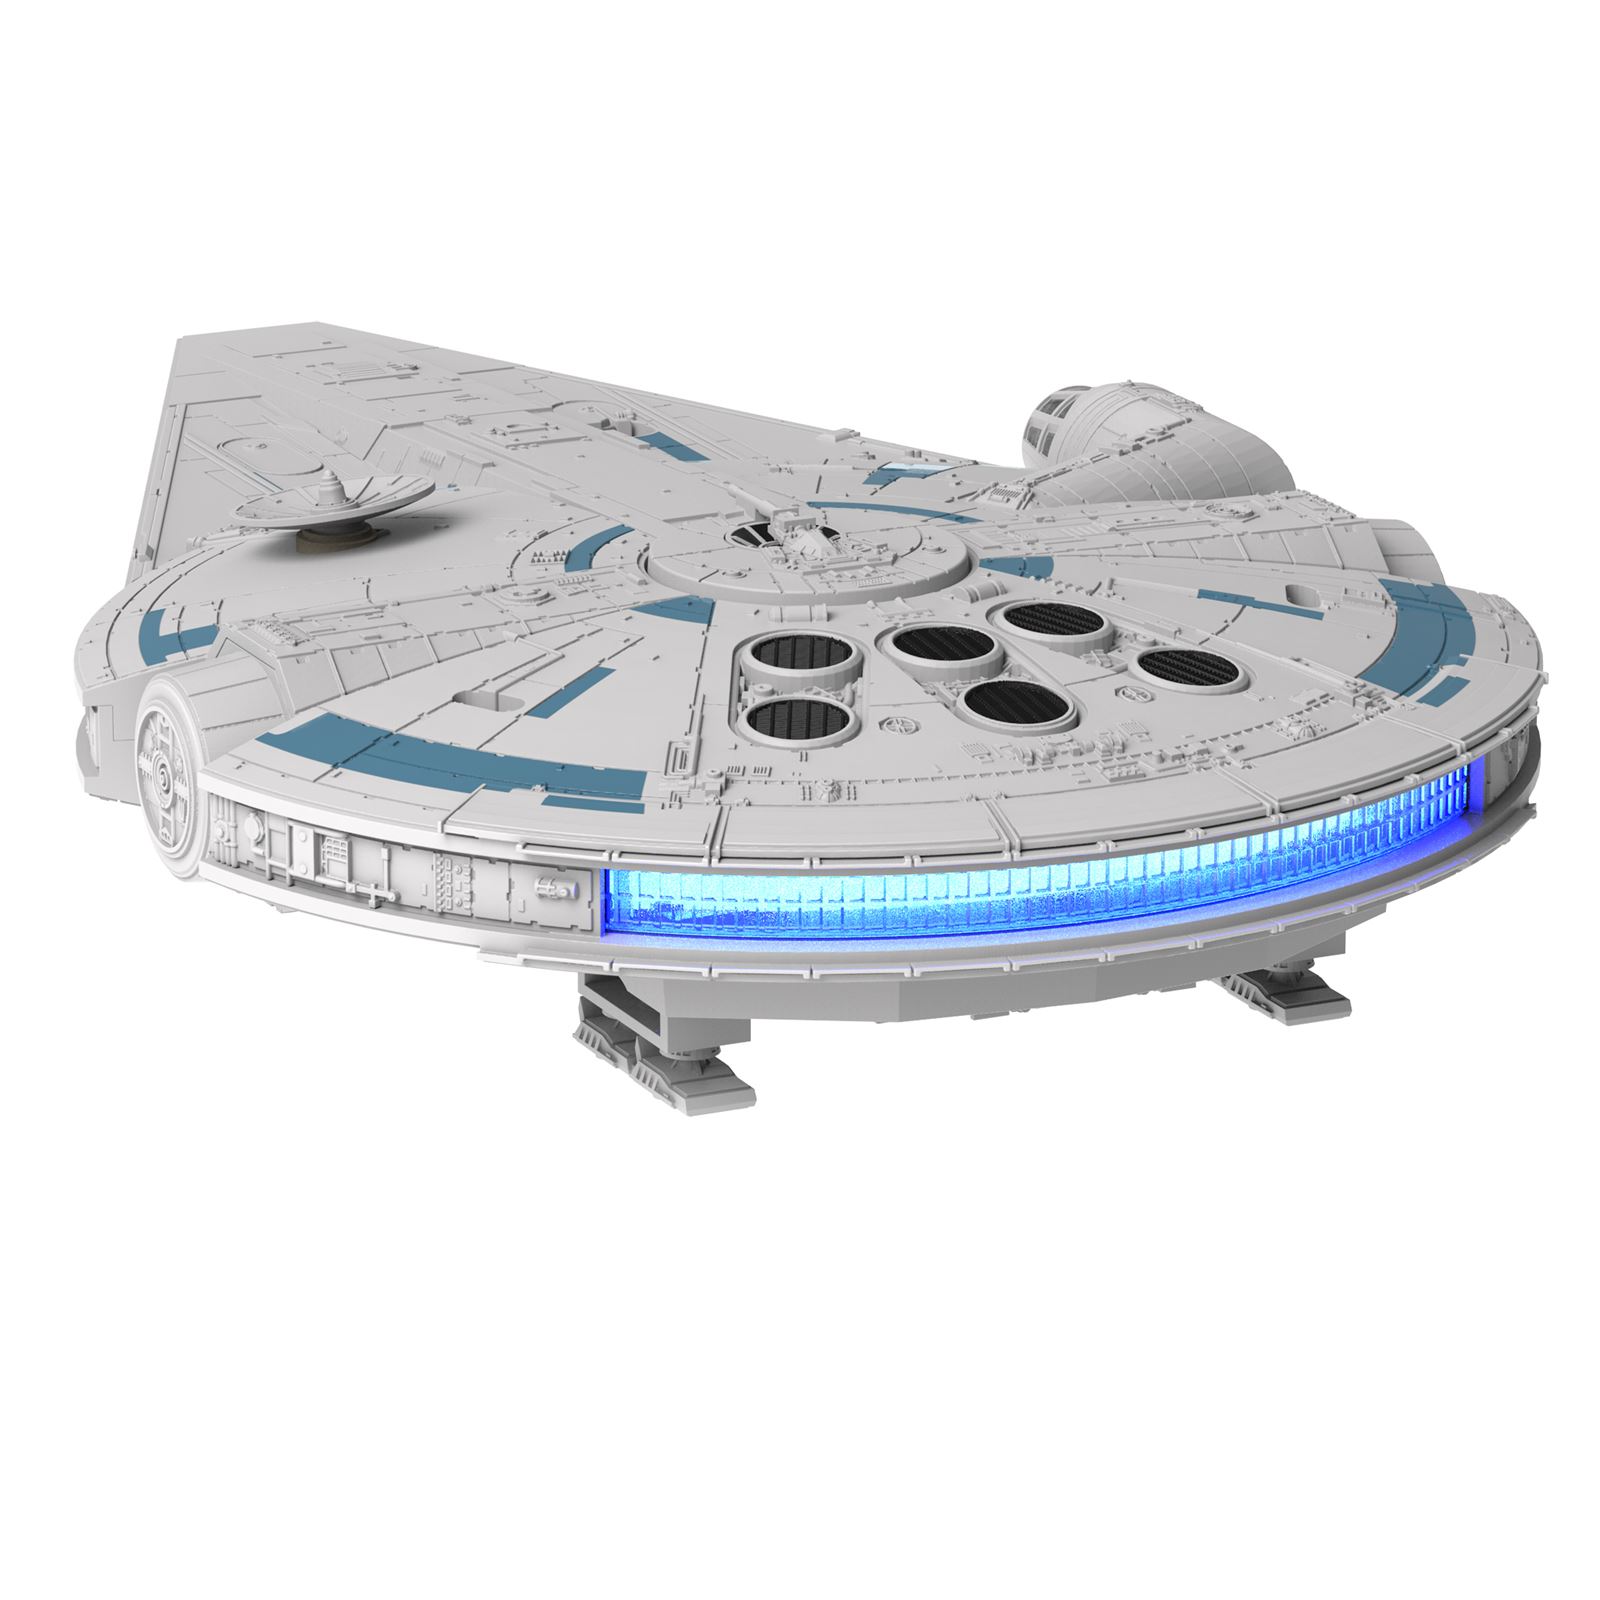 Build & Play "Star Wars Millennium Falcon Han Solo" with New Tool - Imagen 4